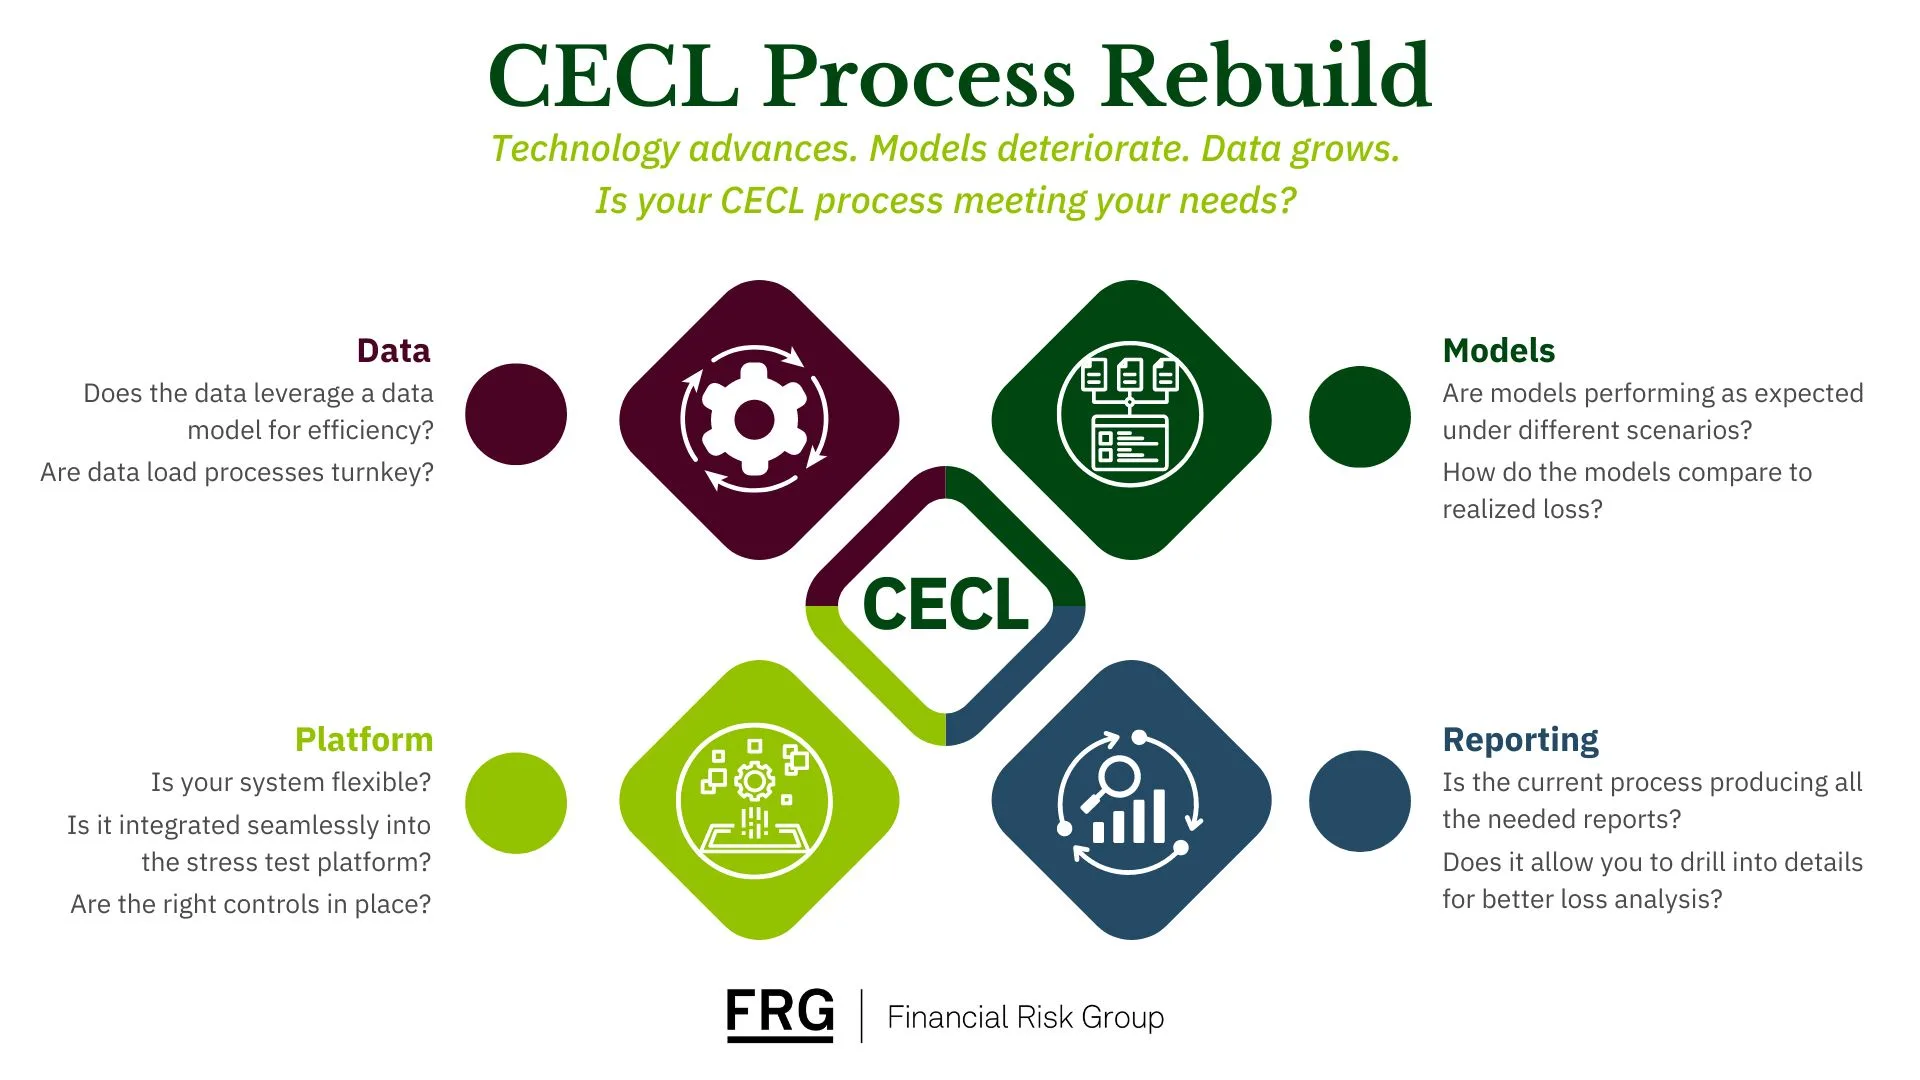 Graphic shows four elements of the CECL process that FIs should evaluate for performance: Data, Platform, Models, and Reporting.